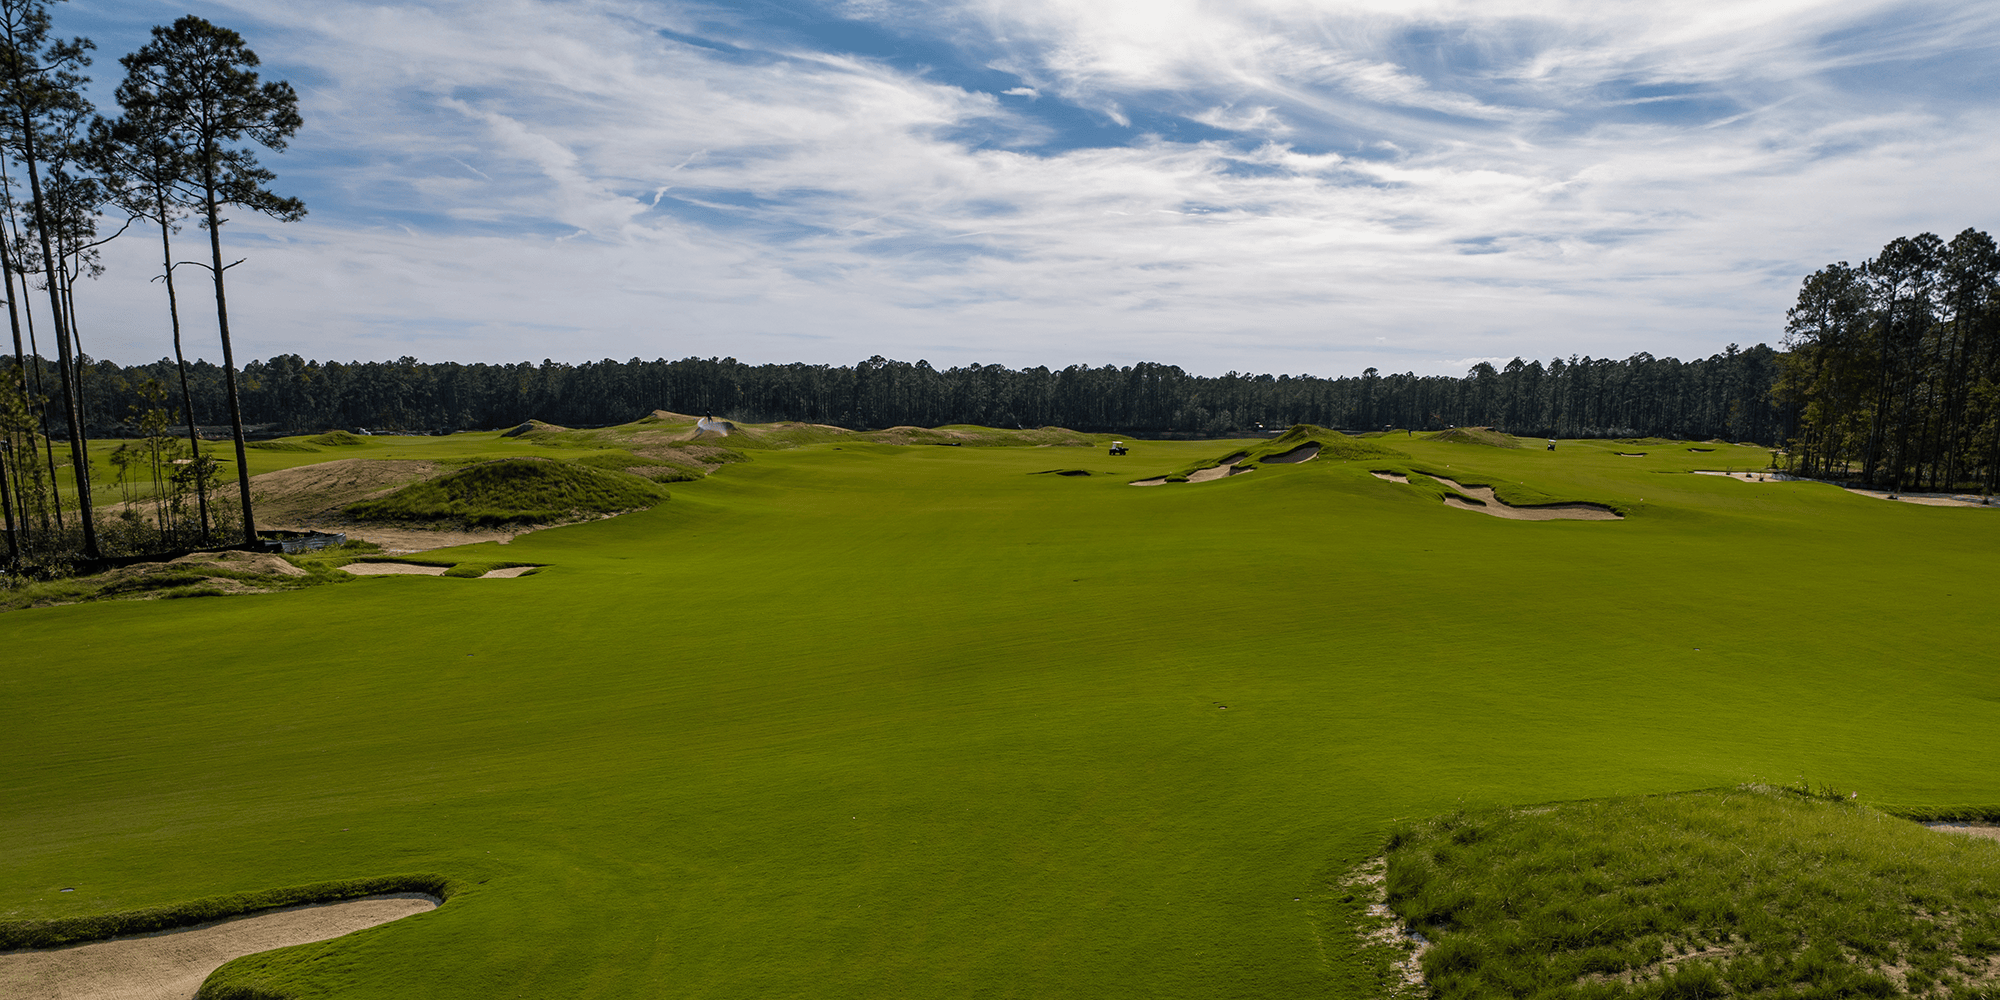 Discover Crossroads at Palmetto Bluff: A Reversible Golf Course with NorthBridge® Bermudagrass